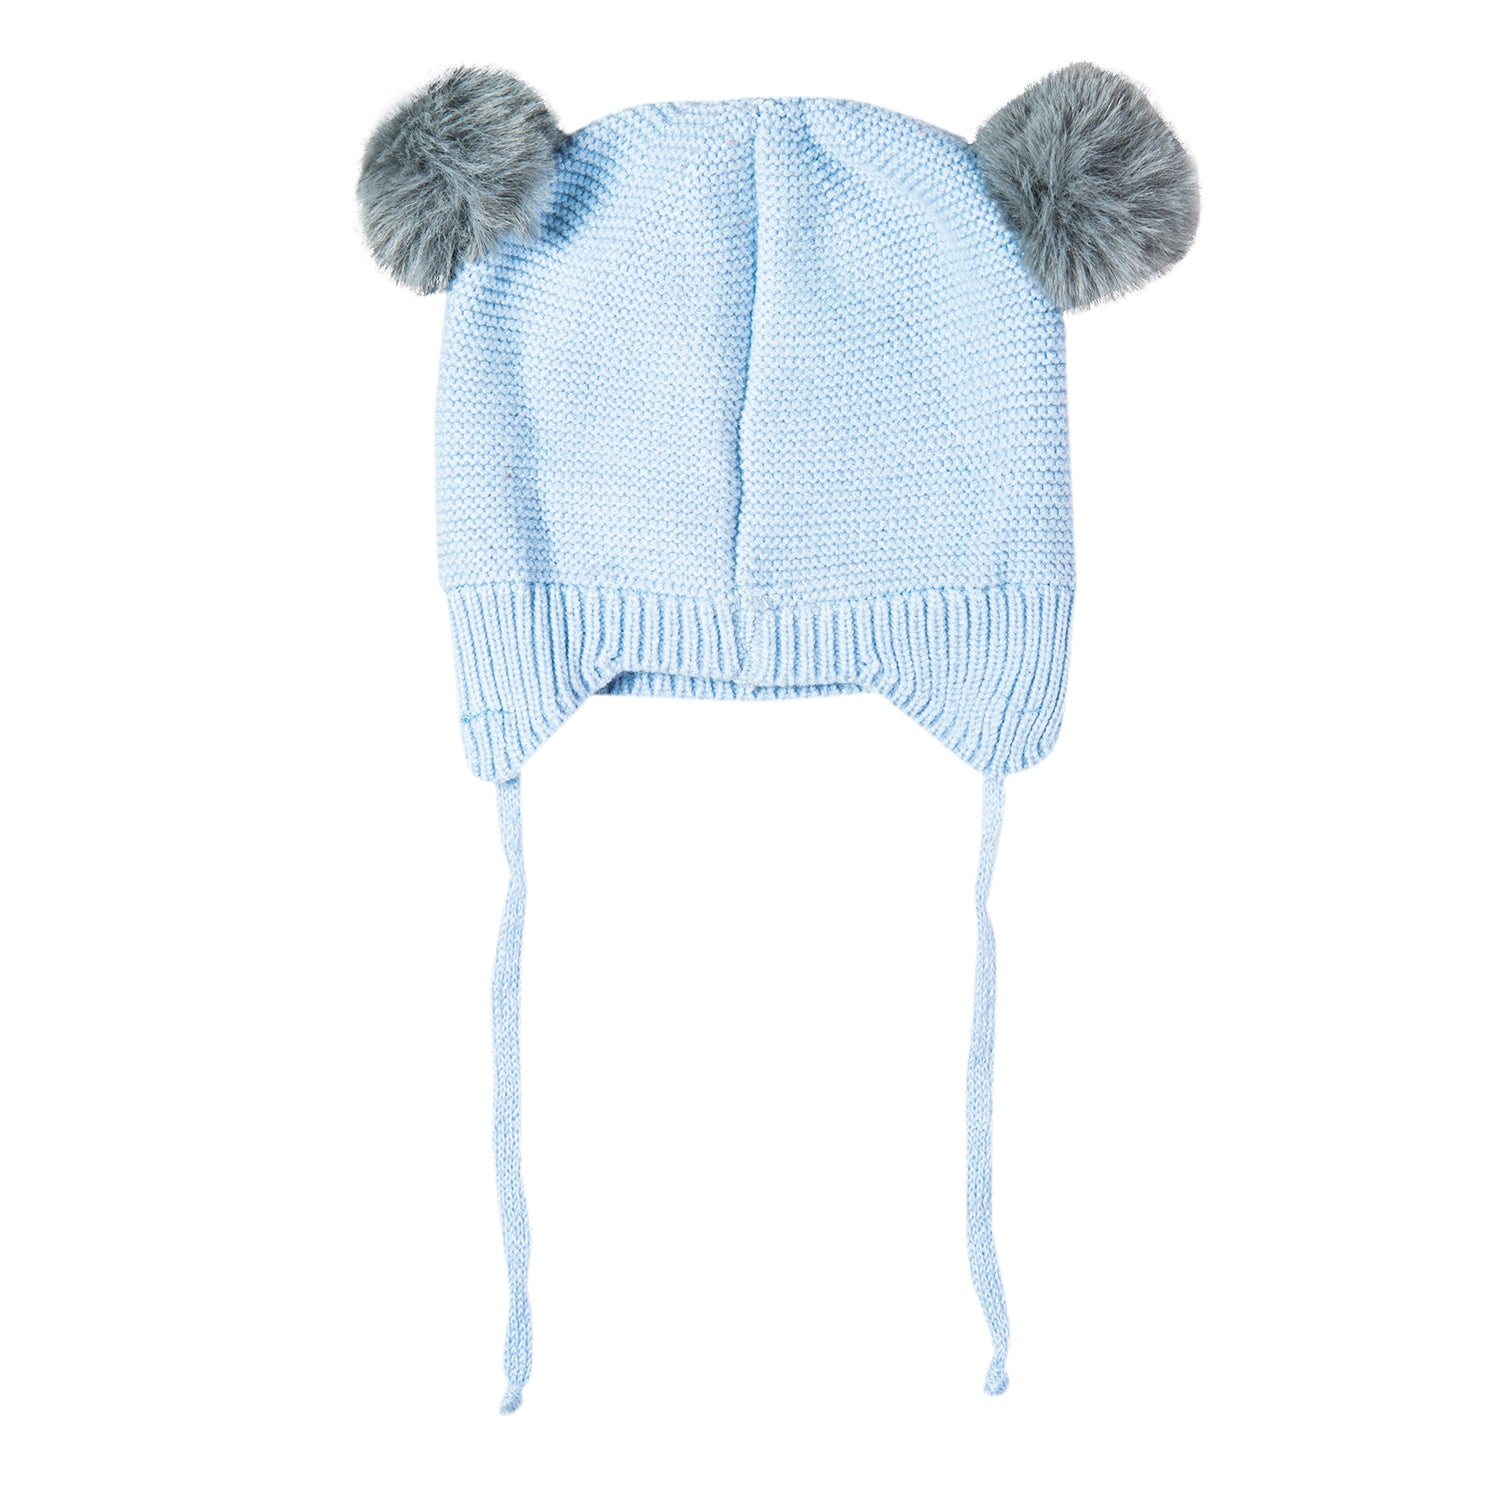 Baby Moo Knit Woollen Cap With Tie Knot For Ear Cover Sleeping Pom Pom Blue